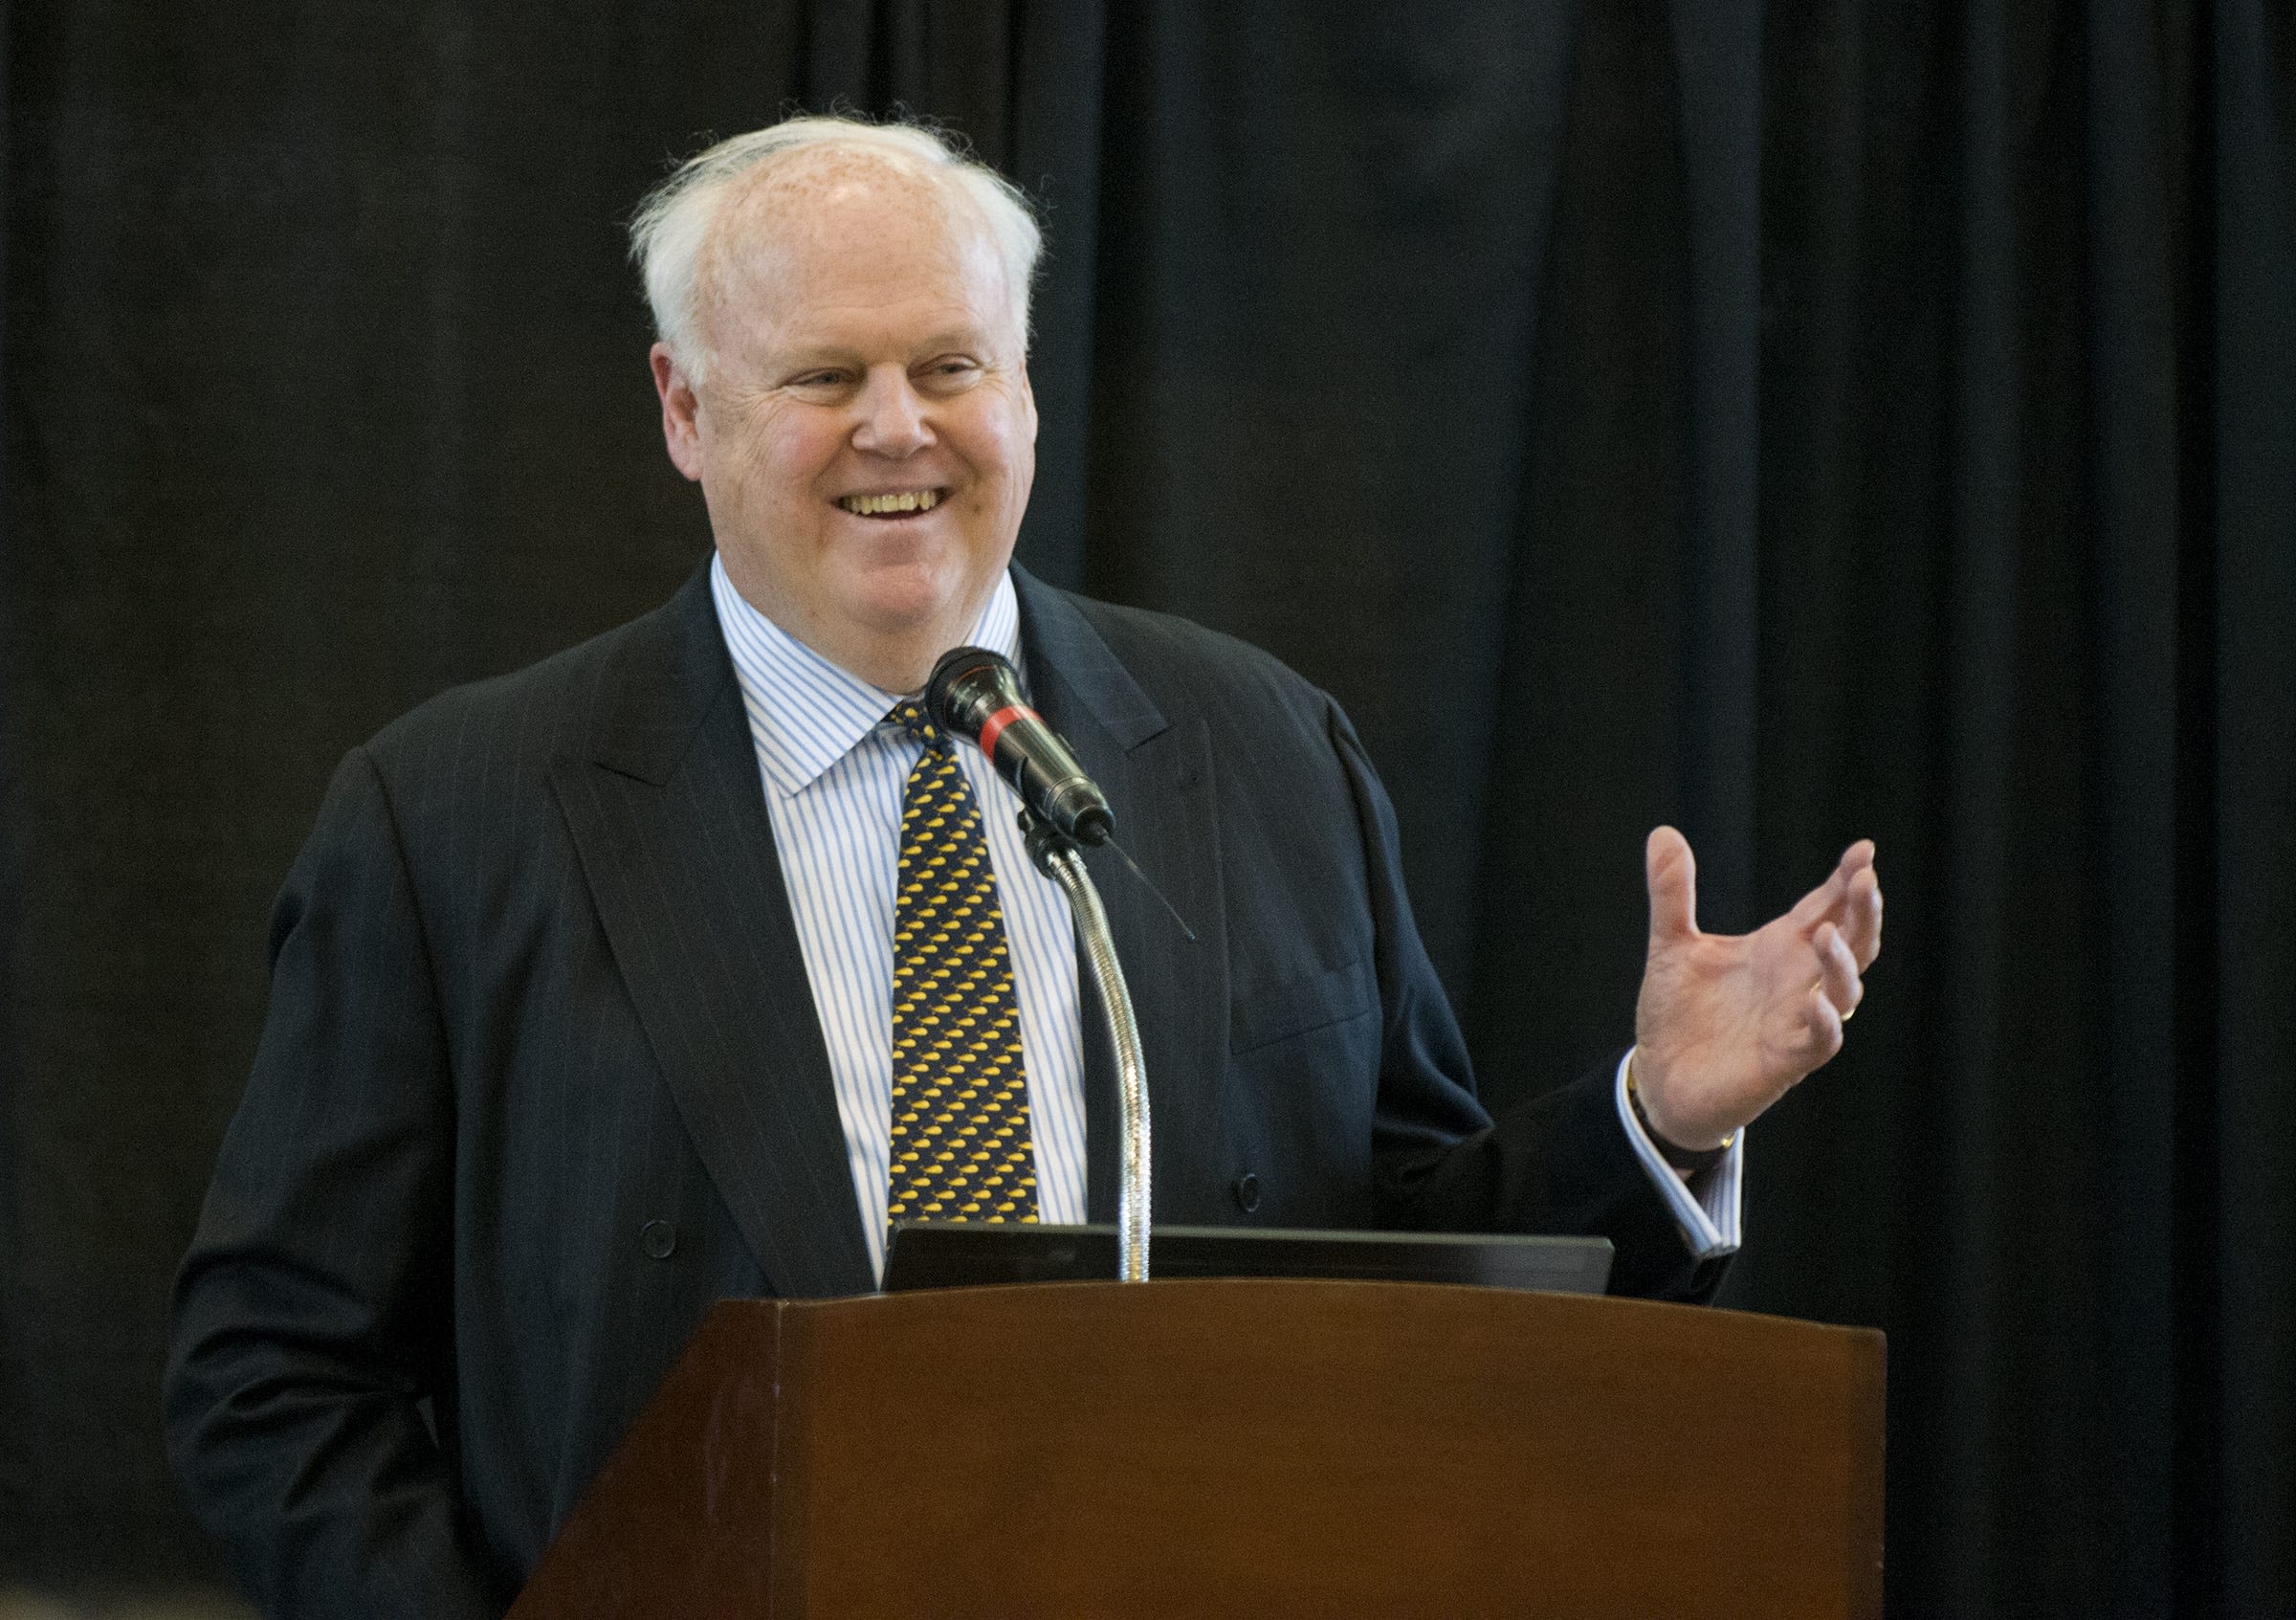 From Colts, Pacers and Unigov, Jim Morris was benevolent wizard behind curtain for Indy